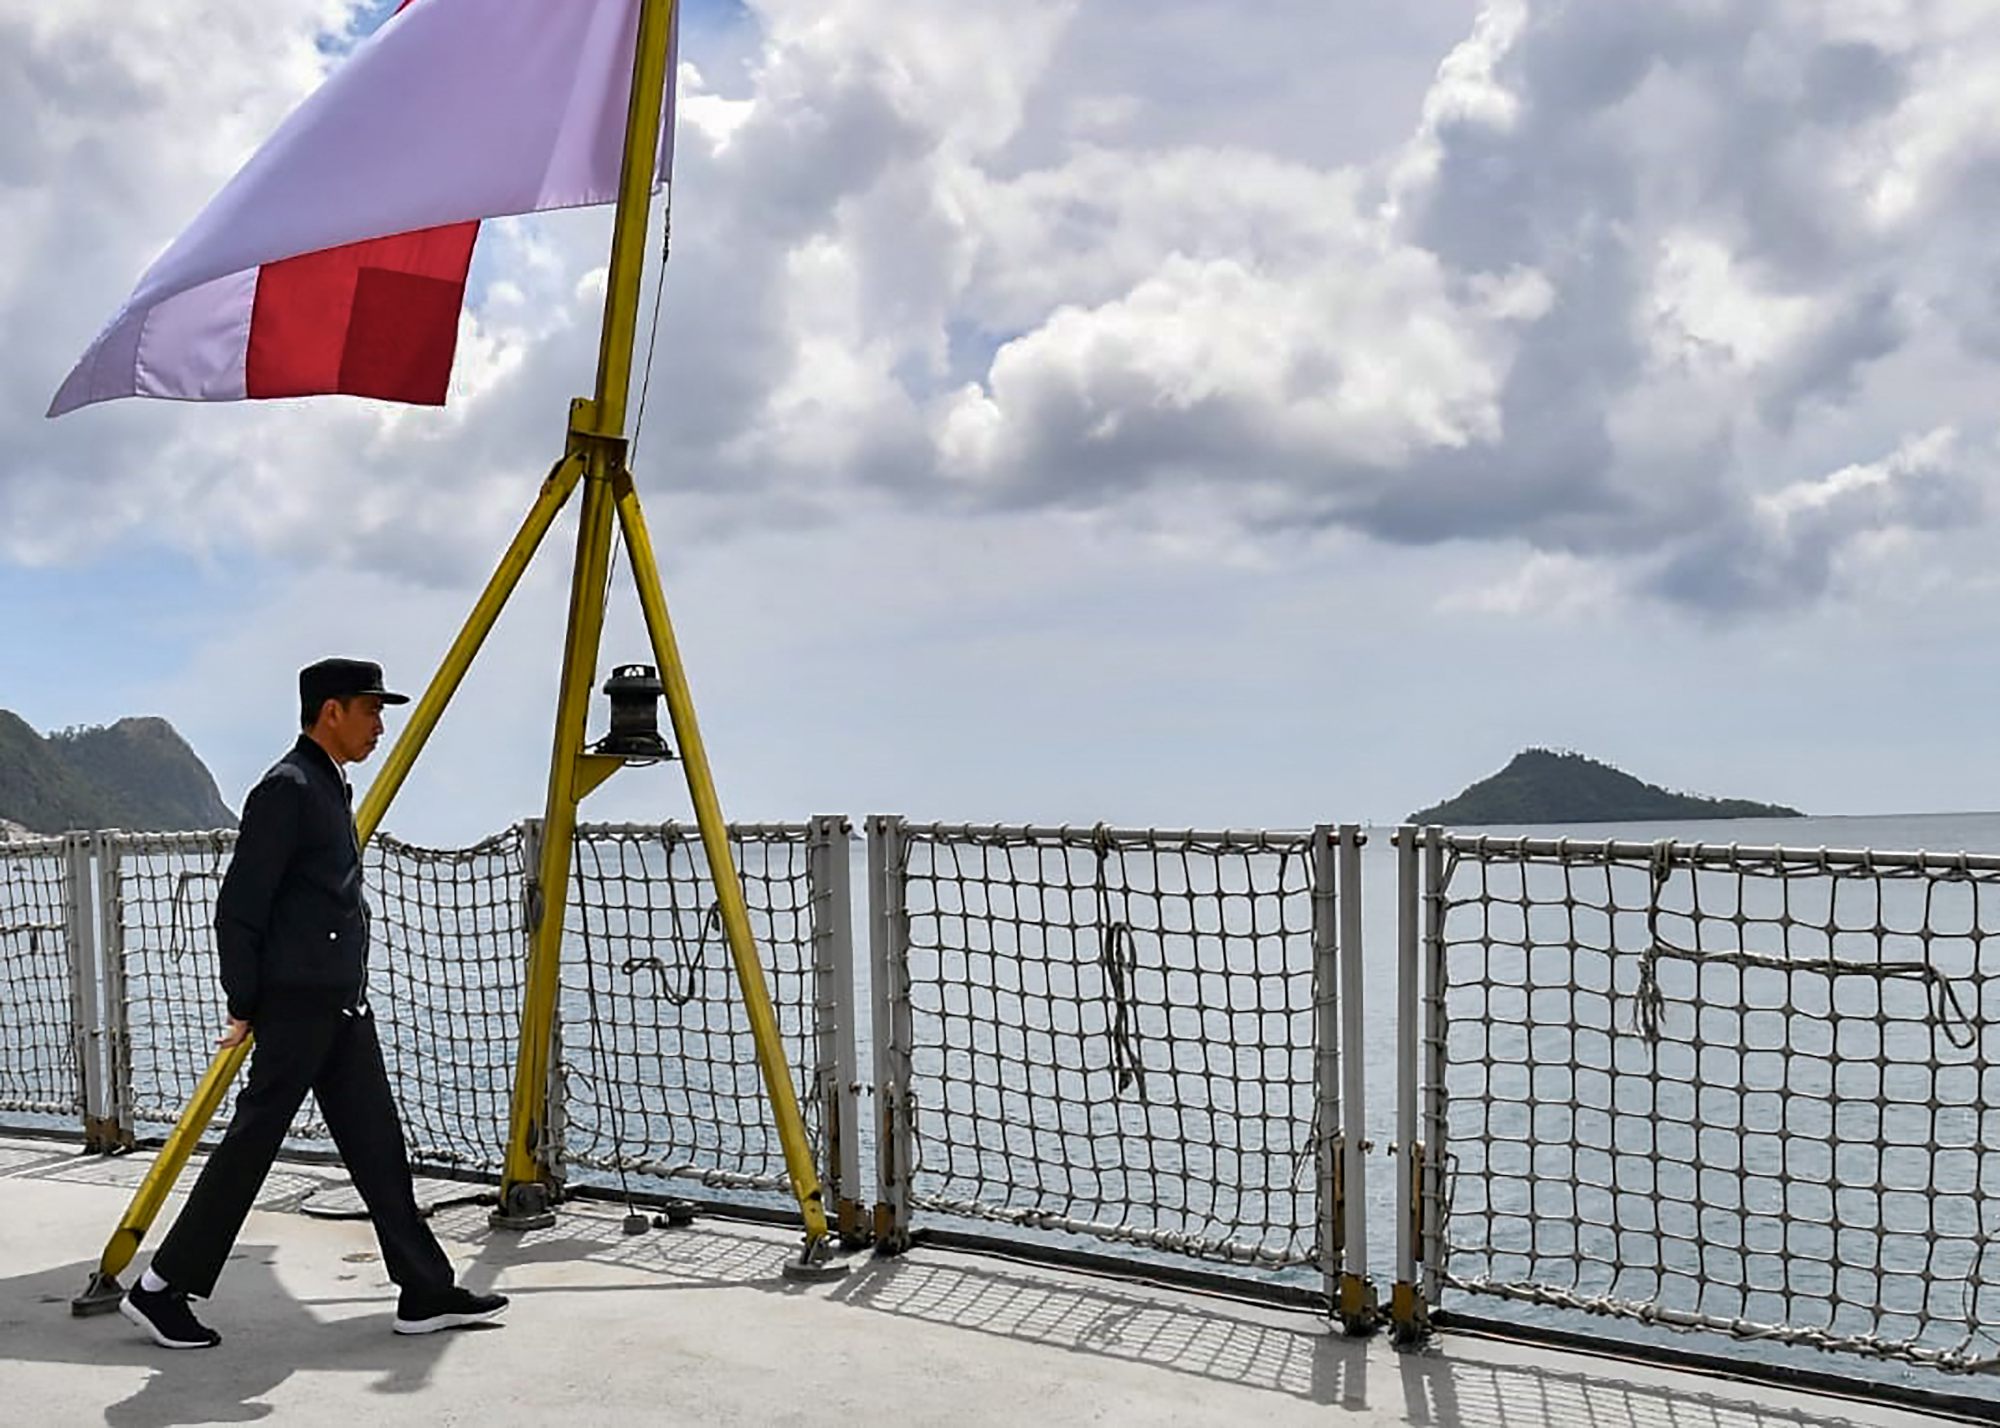 Indonesia’s President Joko Widodo during a 2020 visit to the Natuna Islands, which border the South China Sea. Photo: AFP